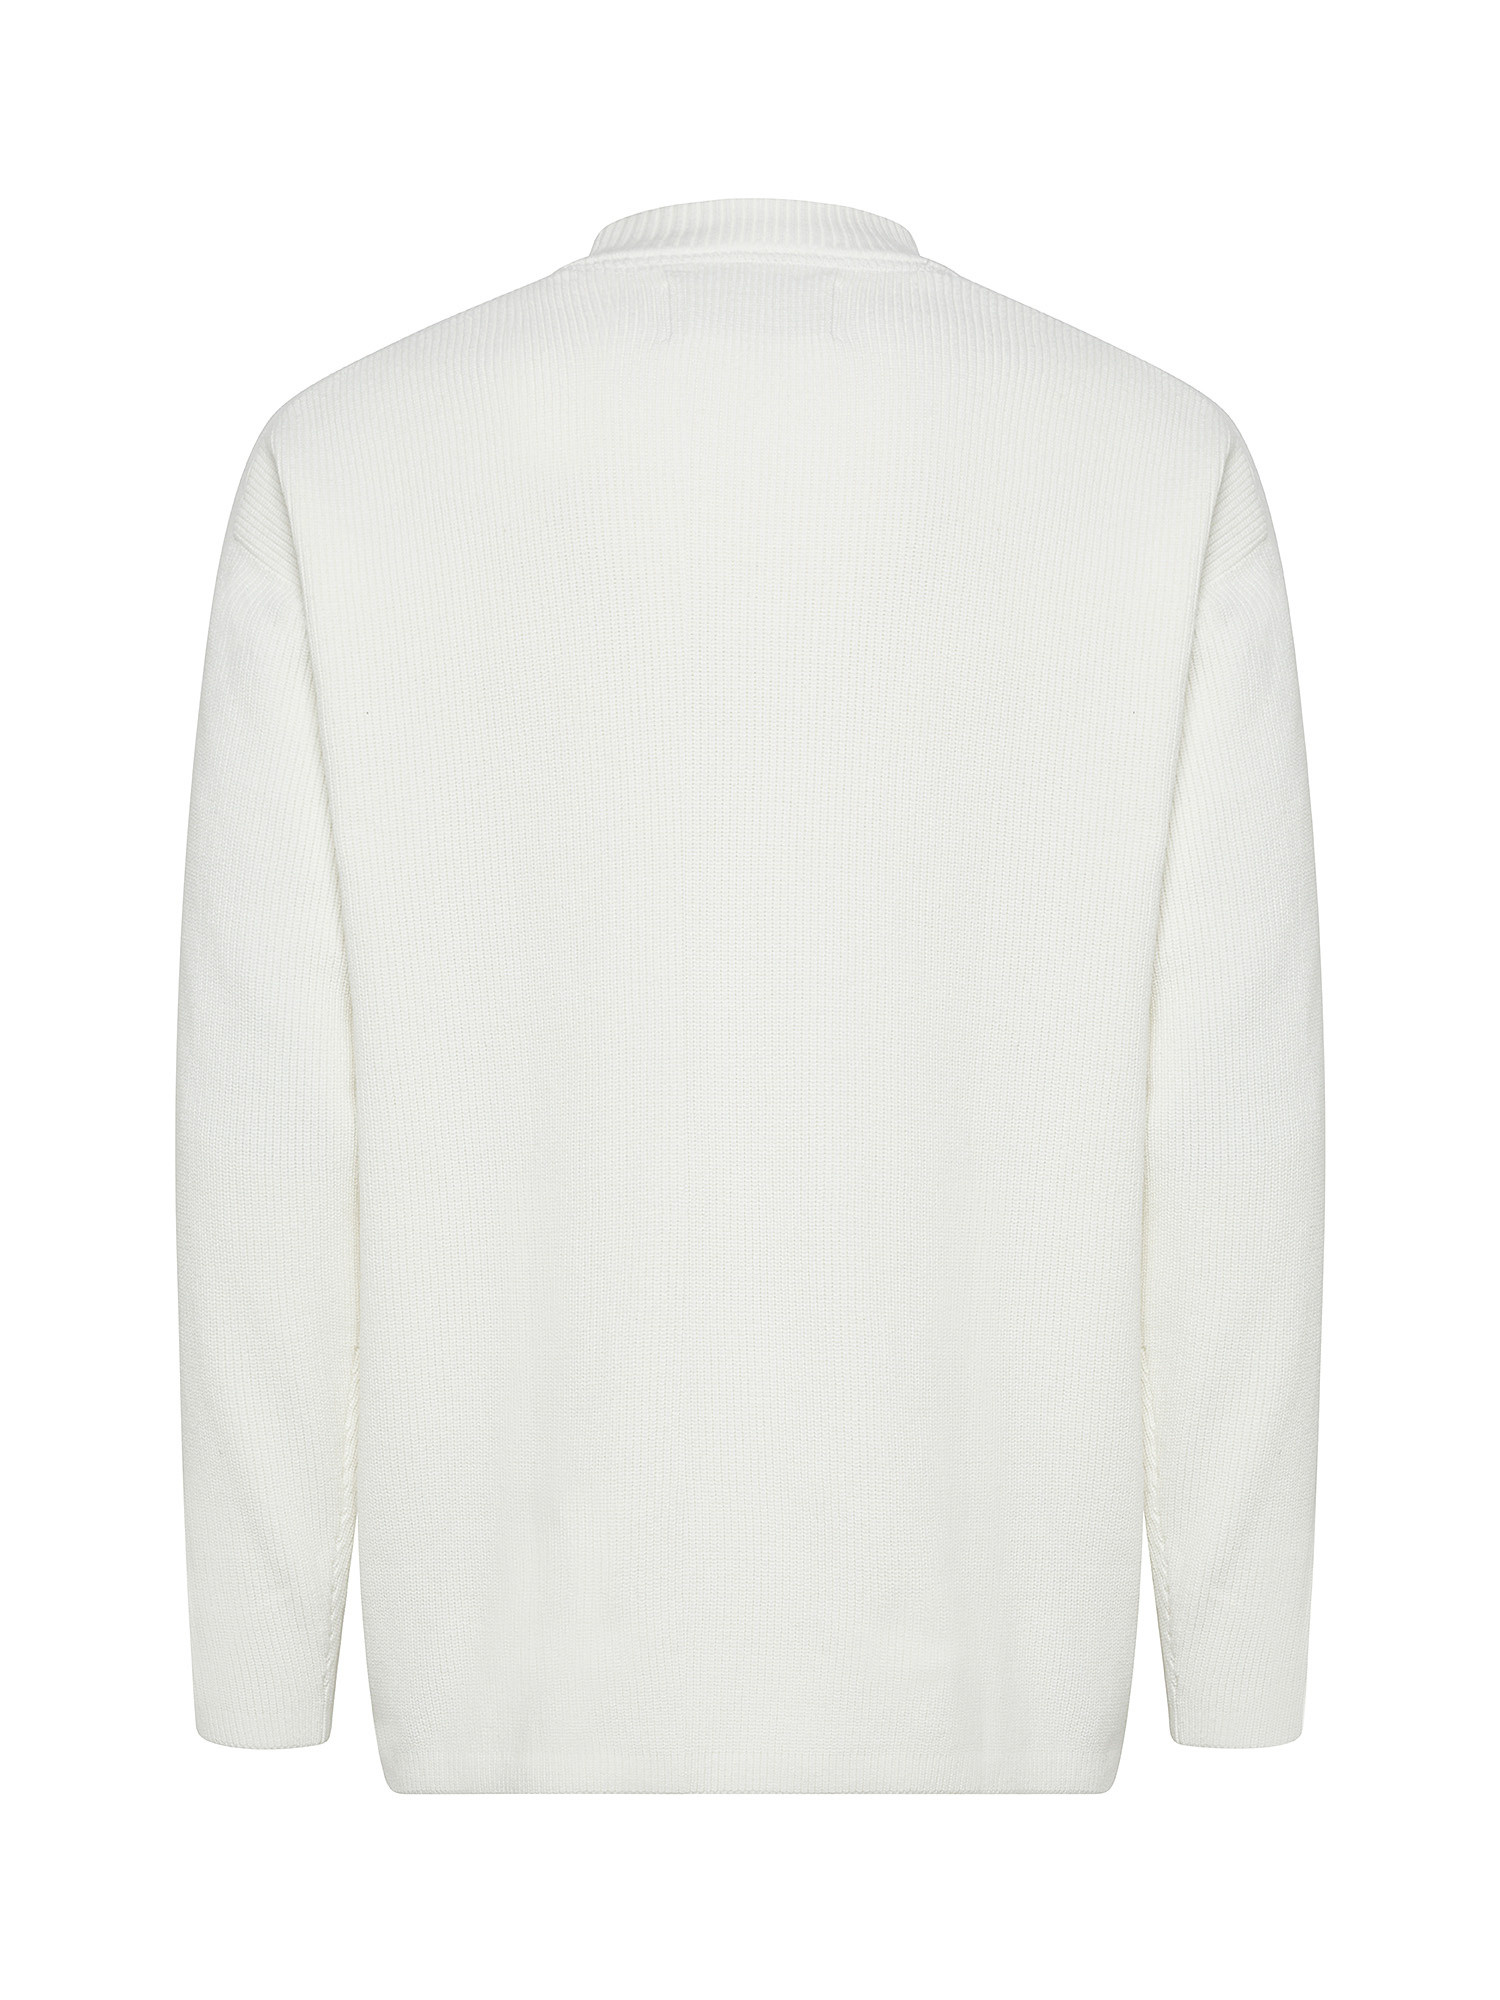 Calvin Klein Jeans -  Pullover a costine in cotone con logo, Bianco, large image number 1